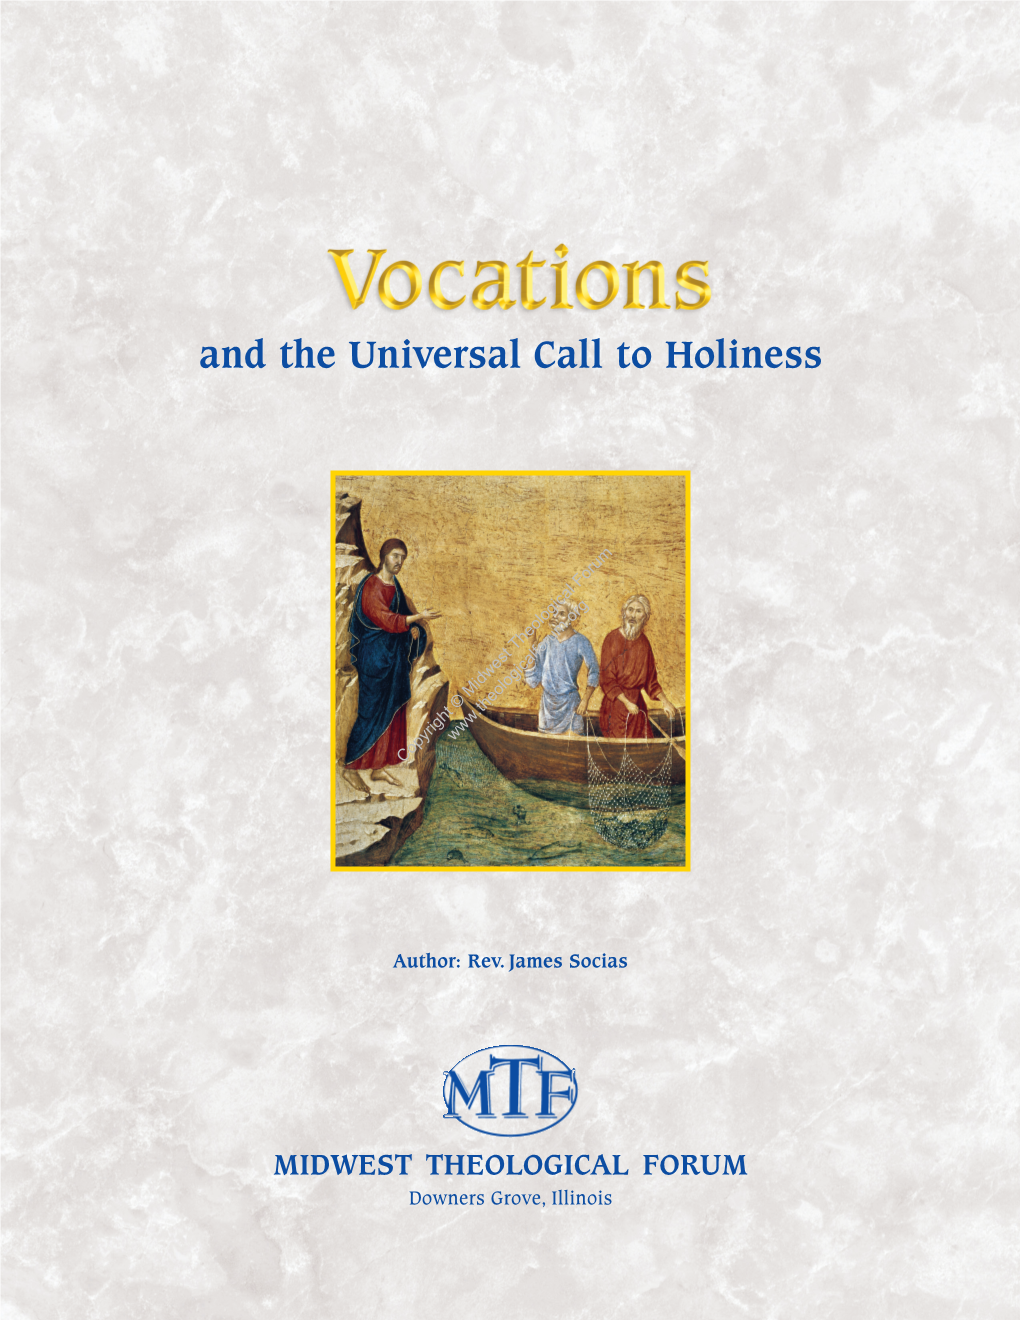 And the Universal Call to Holiness